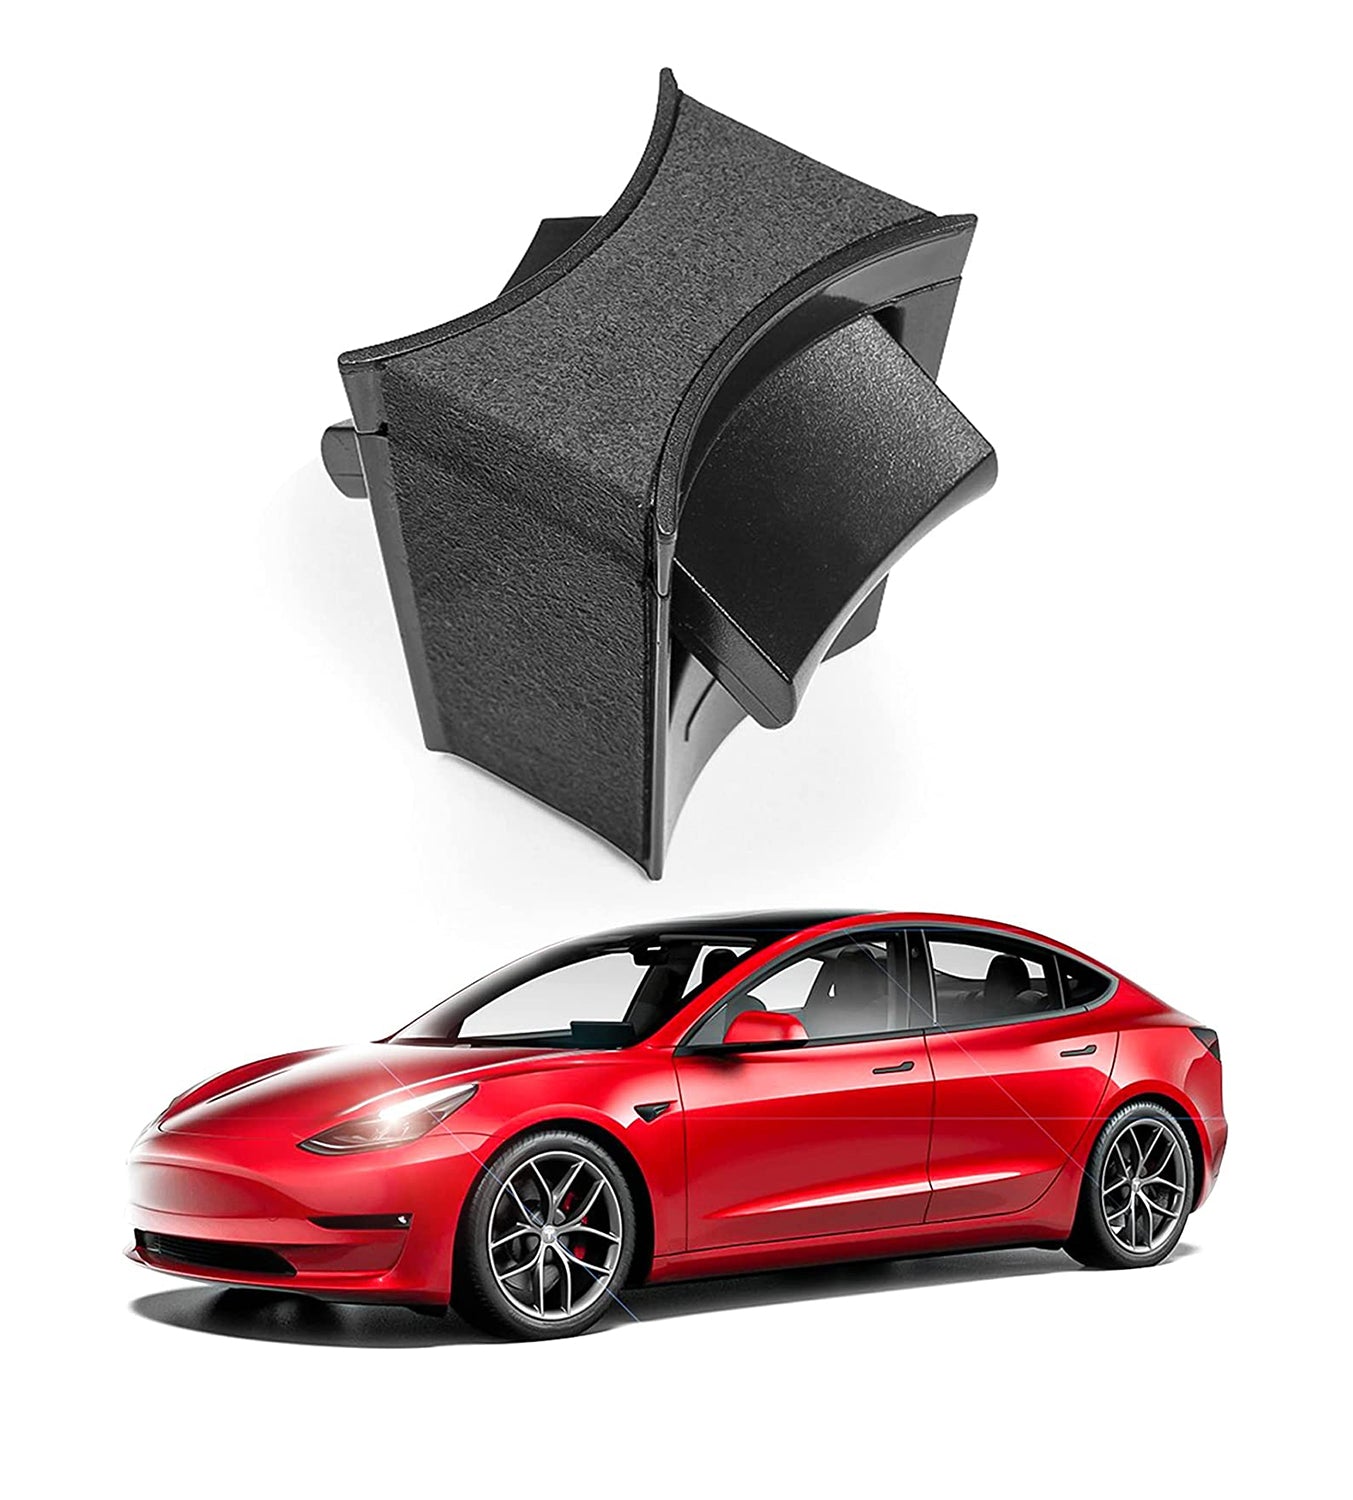 tesla model 3 Y car 2022 2023 2021 2020 2019 2018 s3xy water cups cup holder insert center console black grey blue pink ABS plastic arcoche accessories accessory aftermarket price Vehicles standard long range performance sr+ electric car rwd ev interior exterior diy decoration price elon musk must have 5 7 seats seat